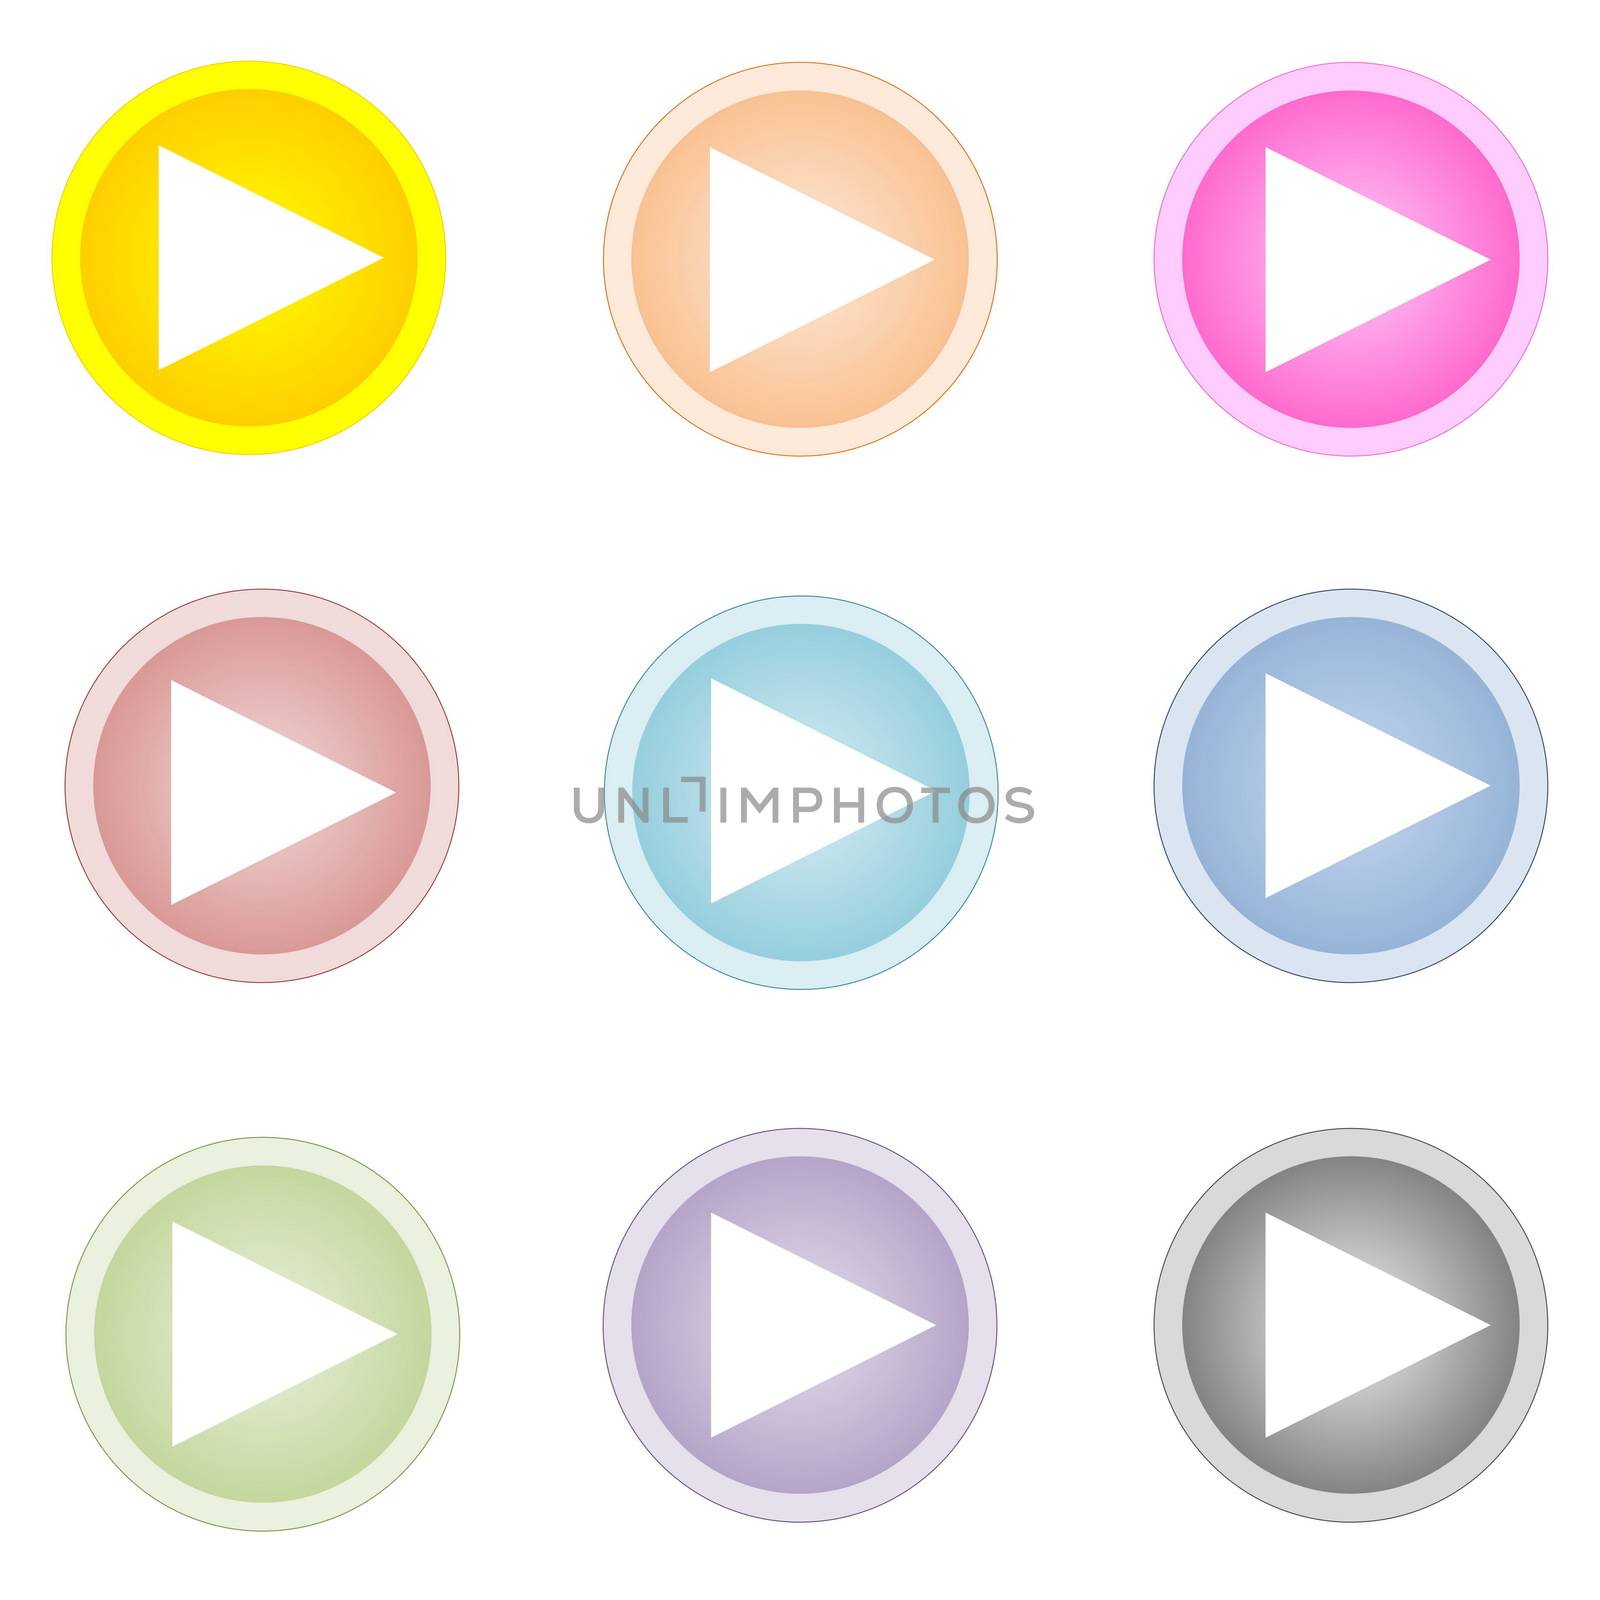 Set of nine colorful play buttons isolated in white background